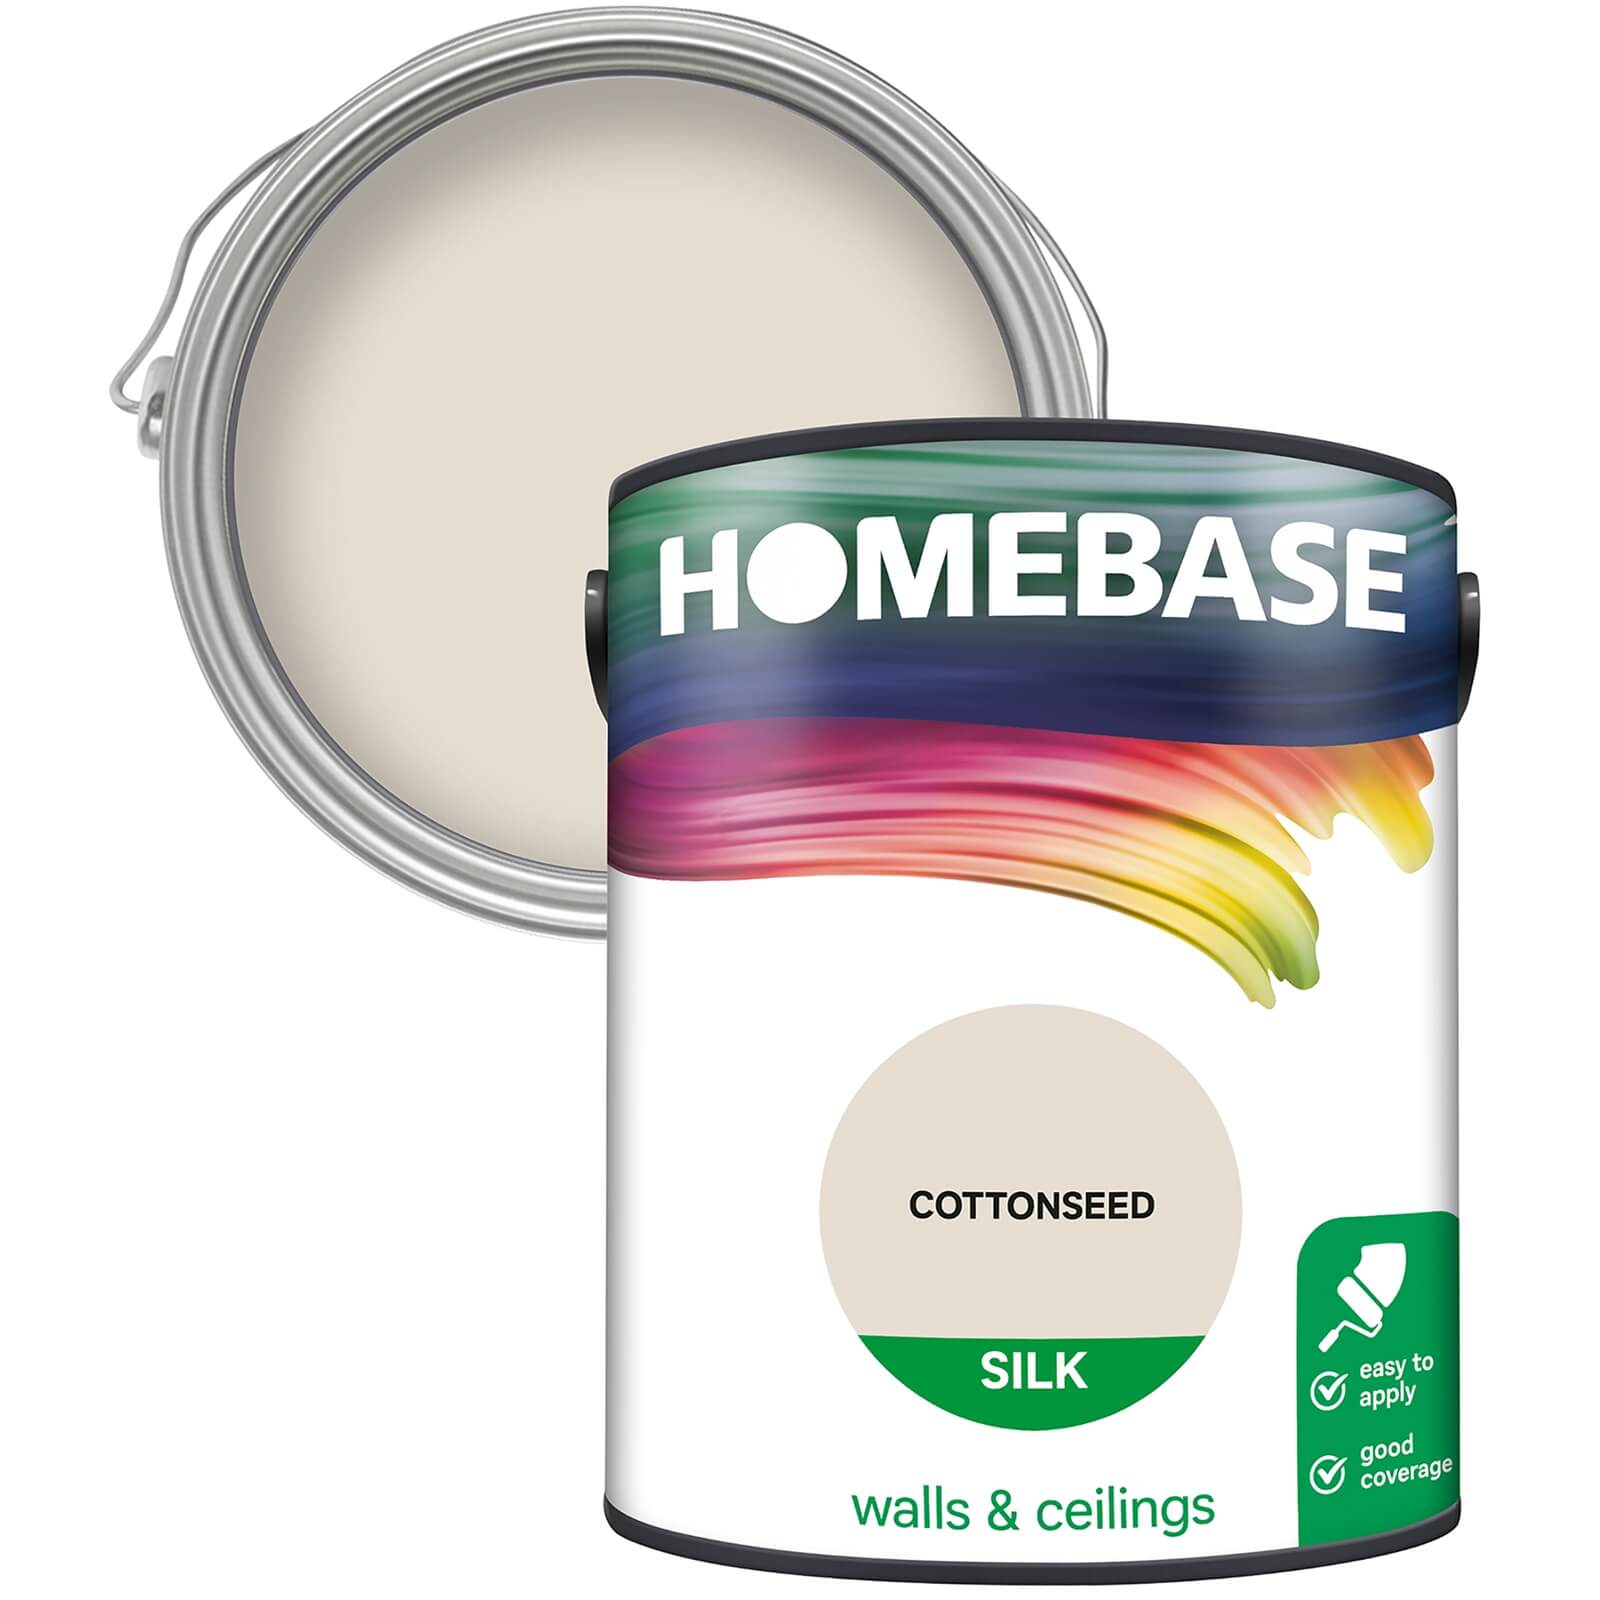 Homebase Silk Emulsion Paint Cottonseed - 5L